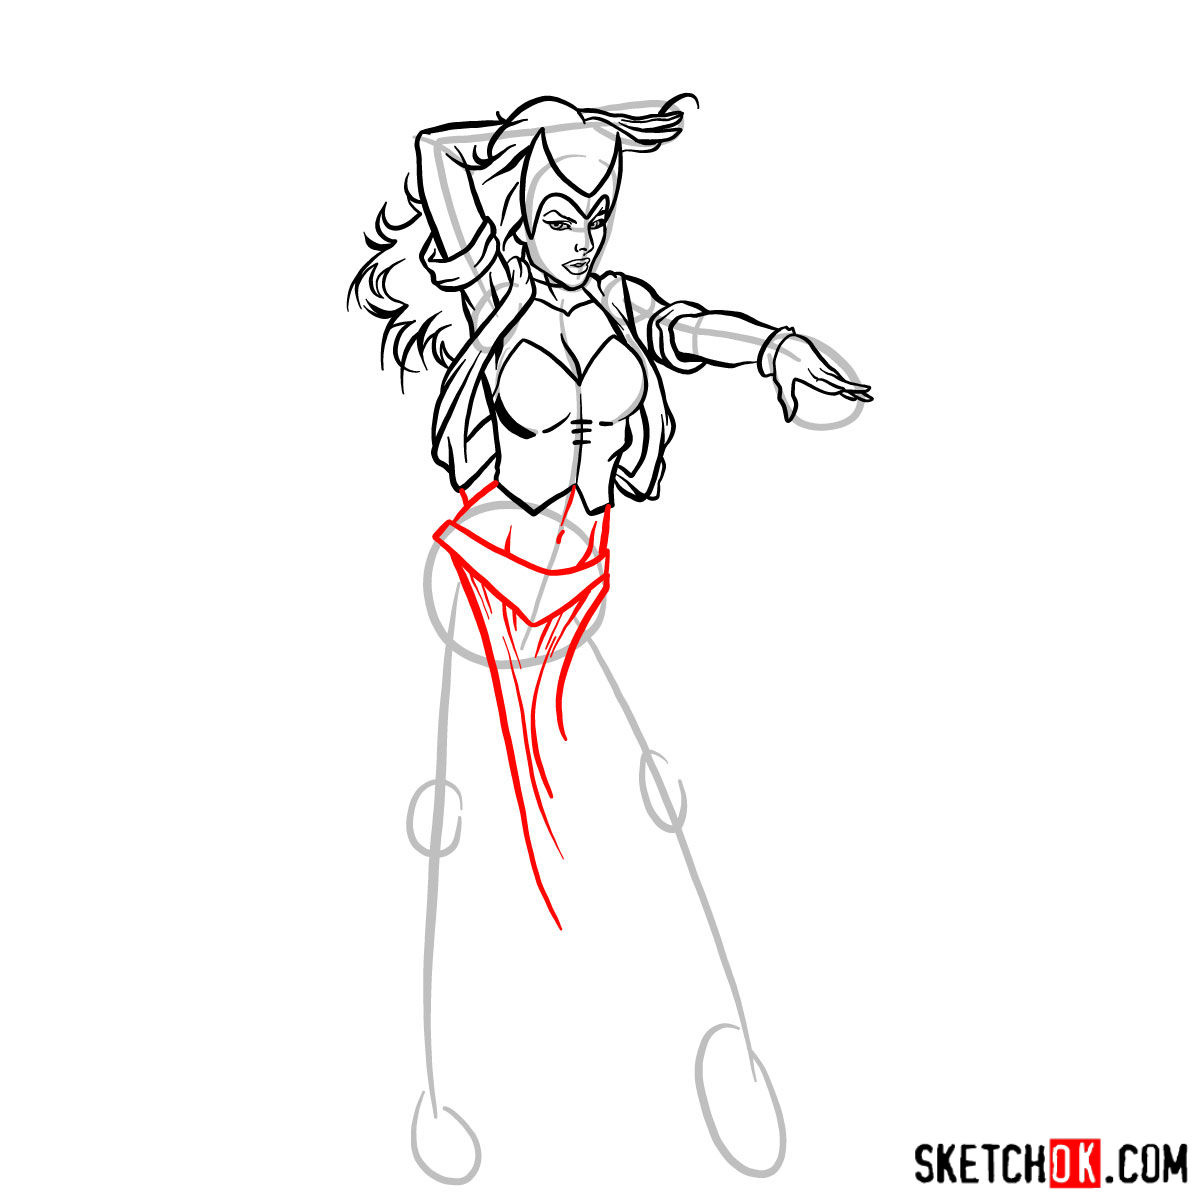 How to draw Scarlet Witch from Marvel Comics - step 10